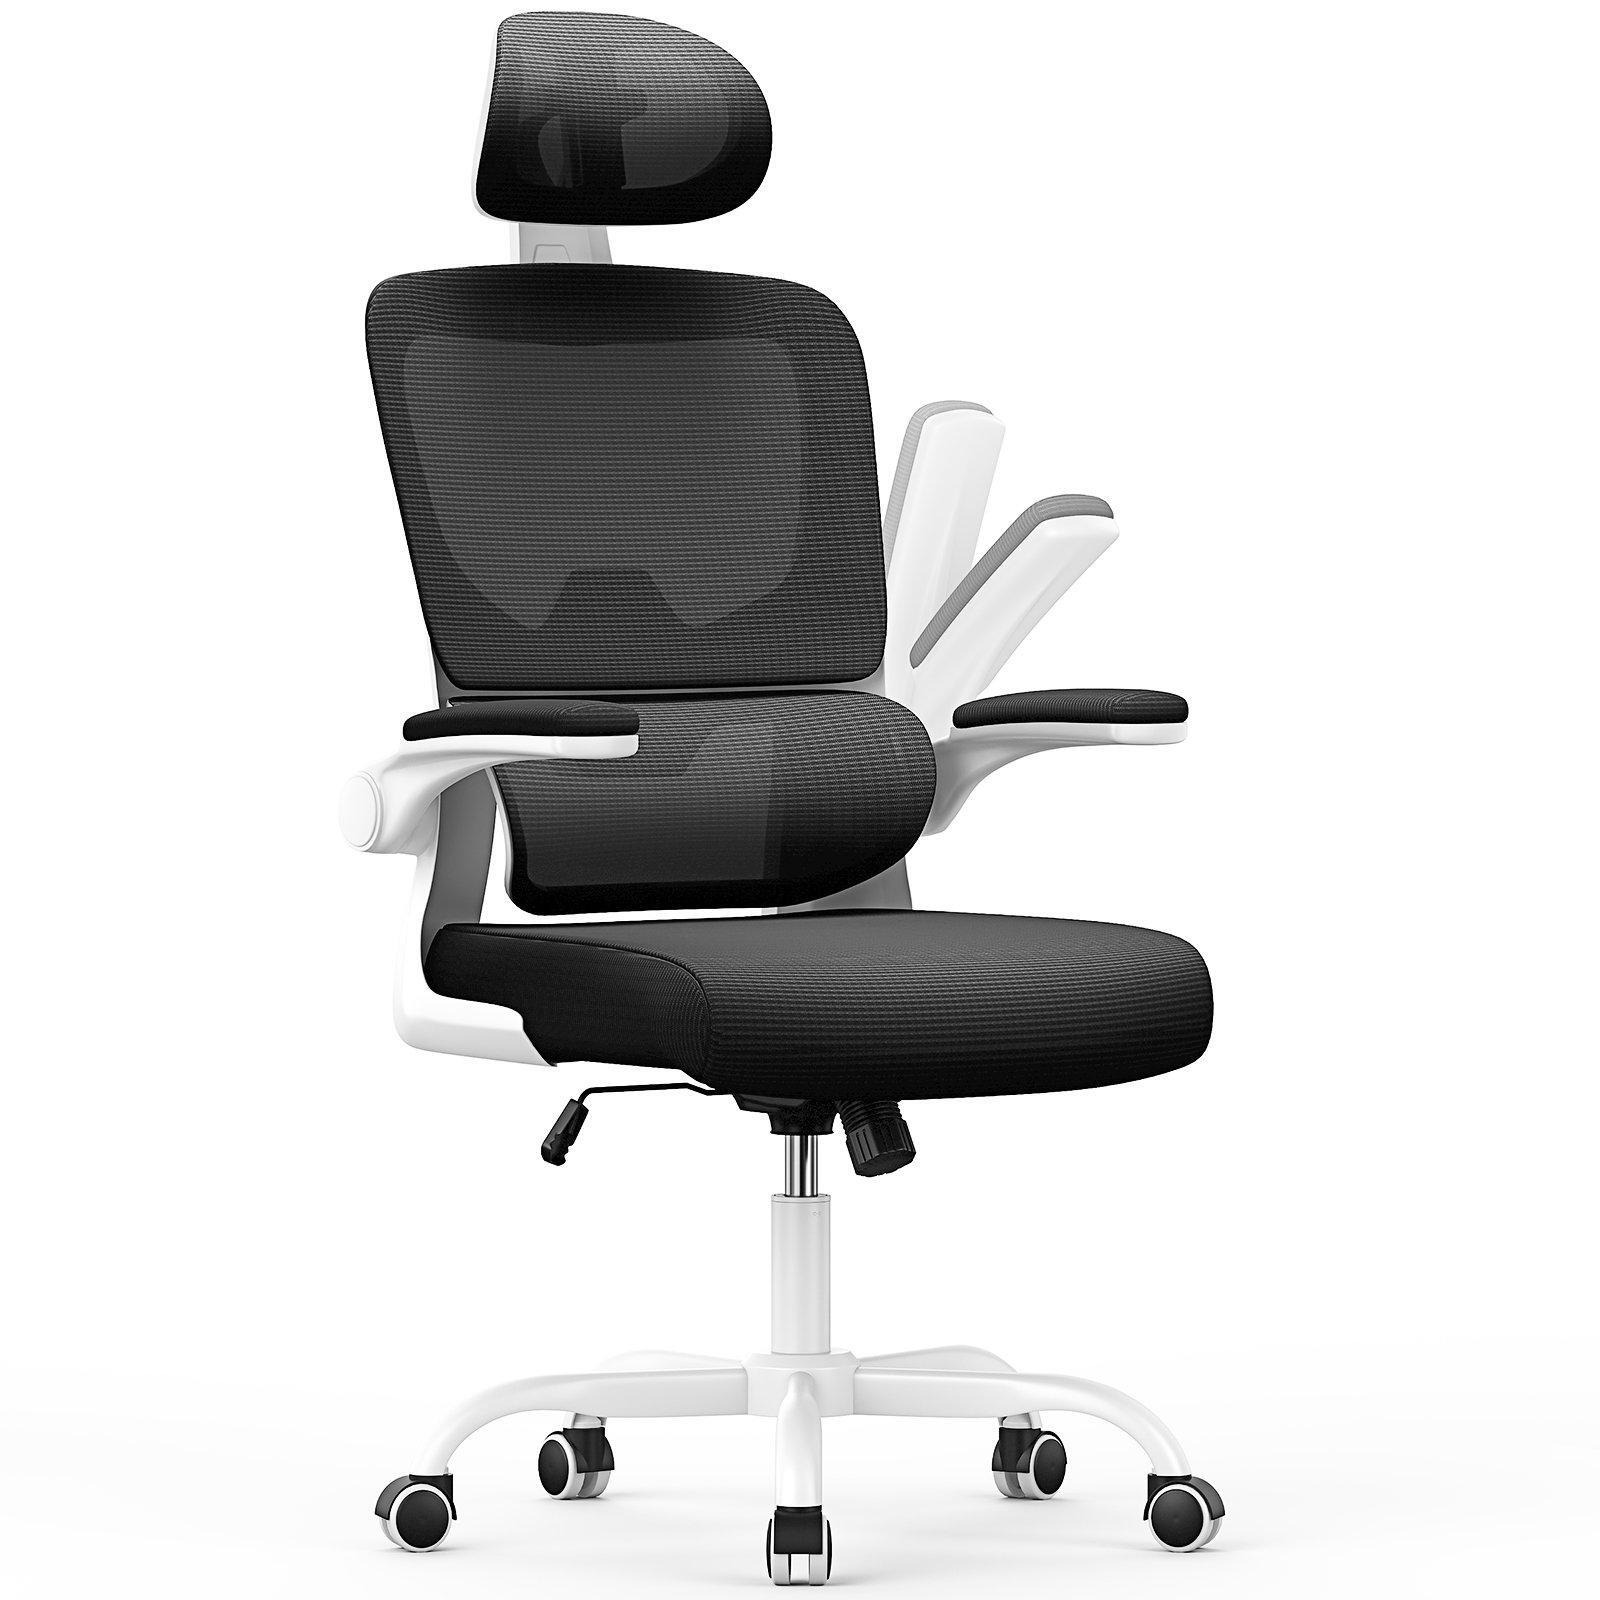 Large Ergonomic Desk Chairs,High Back Computer Chair with Lumbar Support, Breathable Mesh, Adjustable Headrest and Armrests - image 1